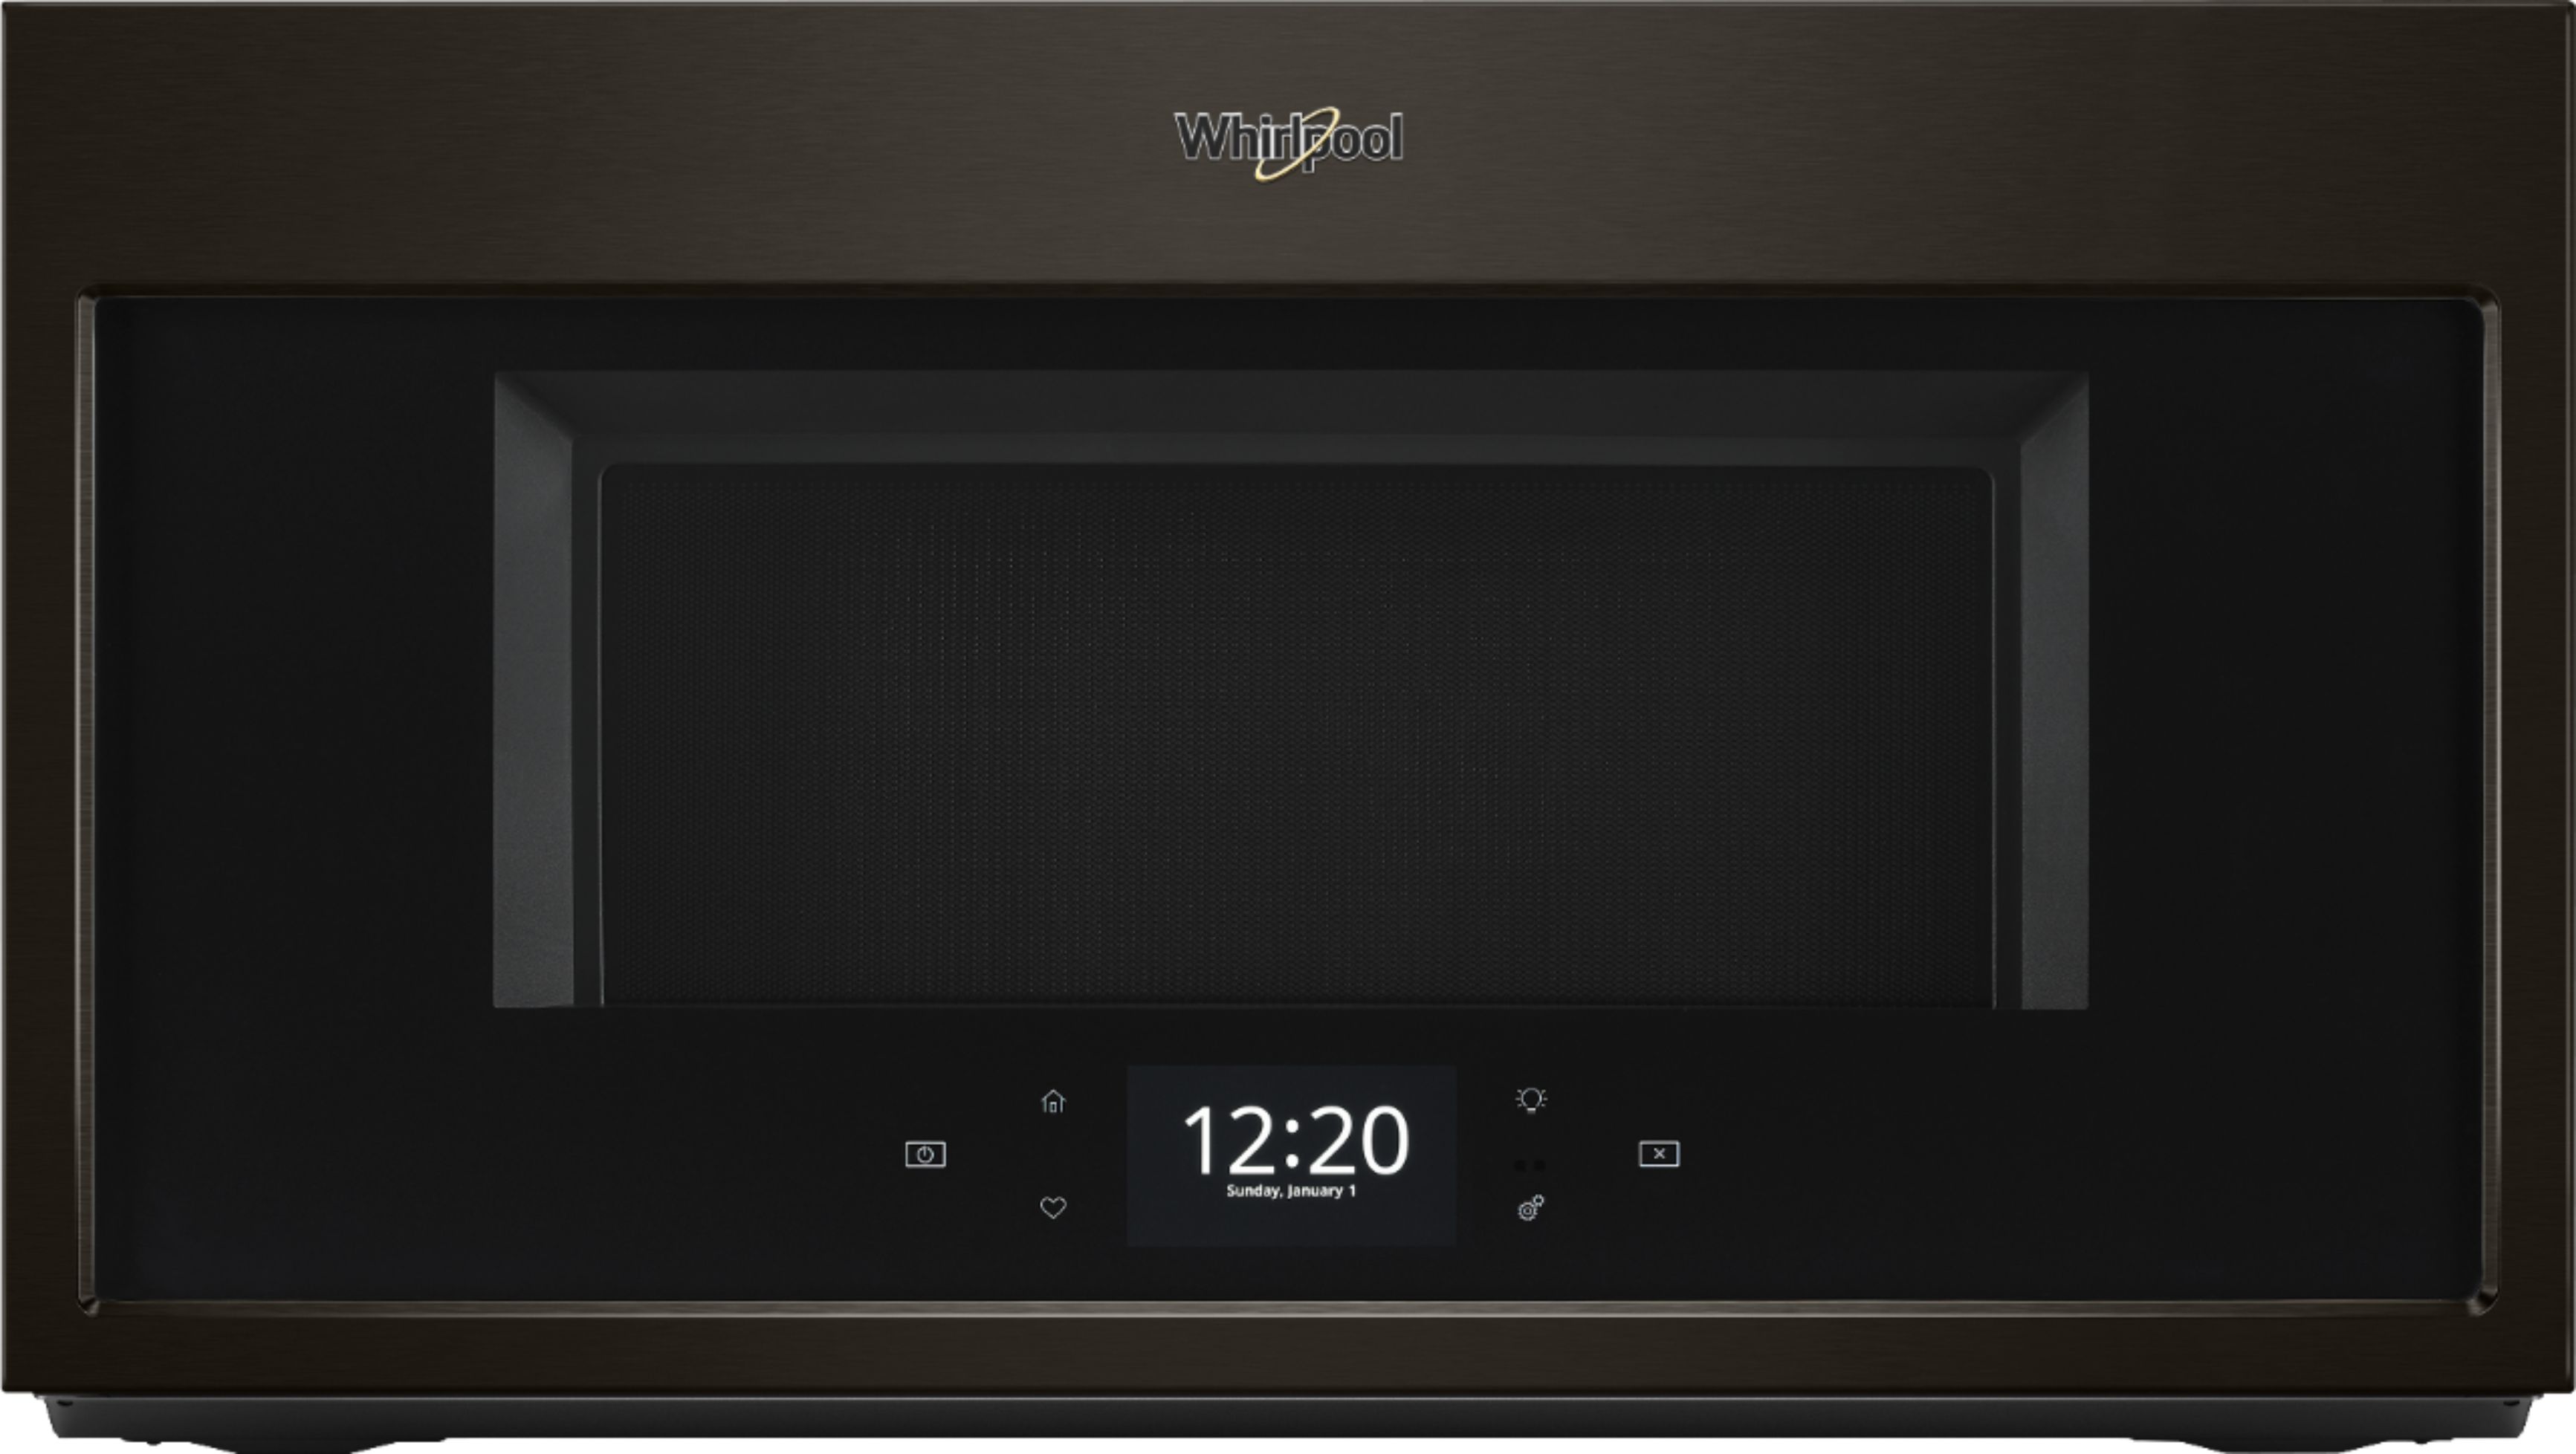 Whirlpool - 1.9 Cu. Ft. Convection Over-the-Range Microwave - Black